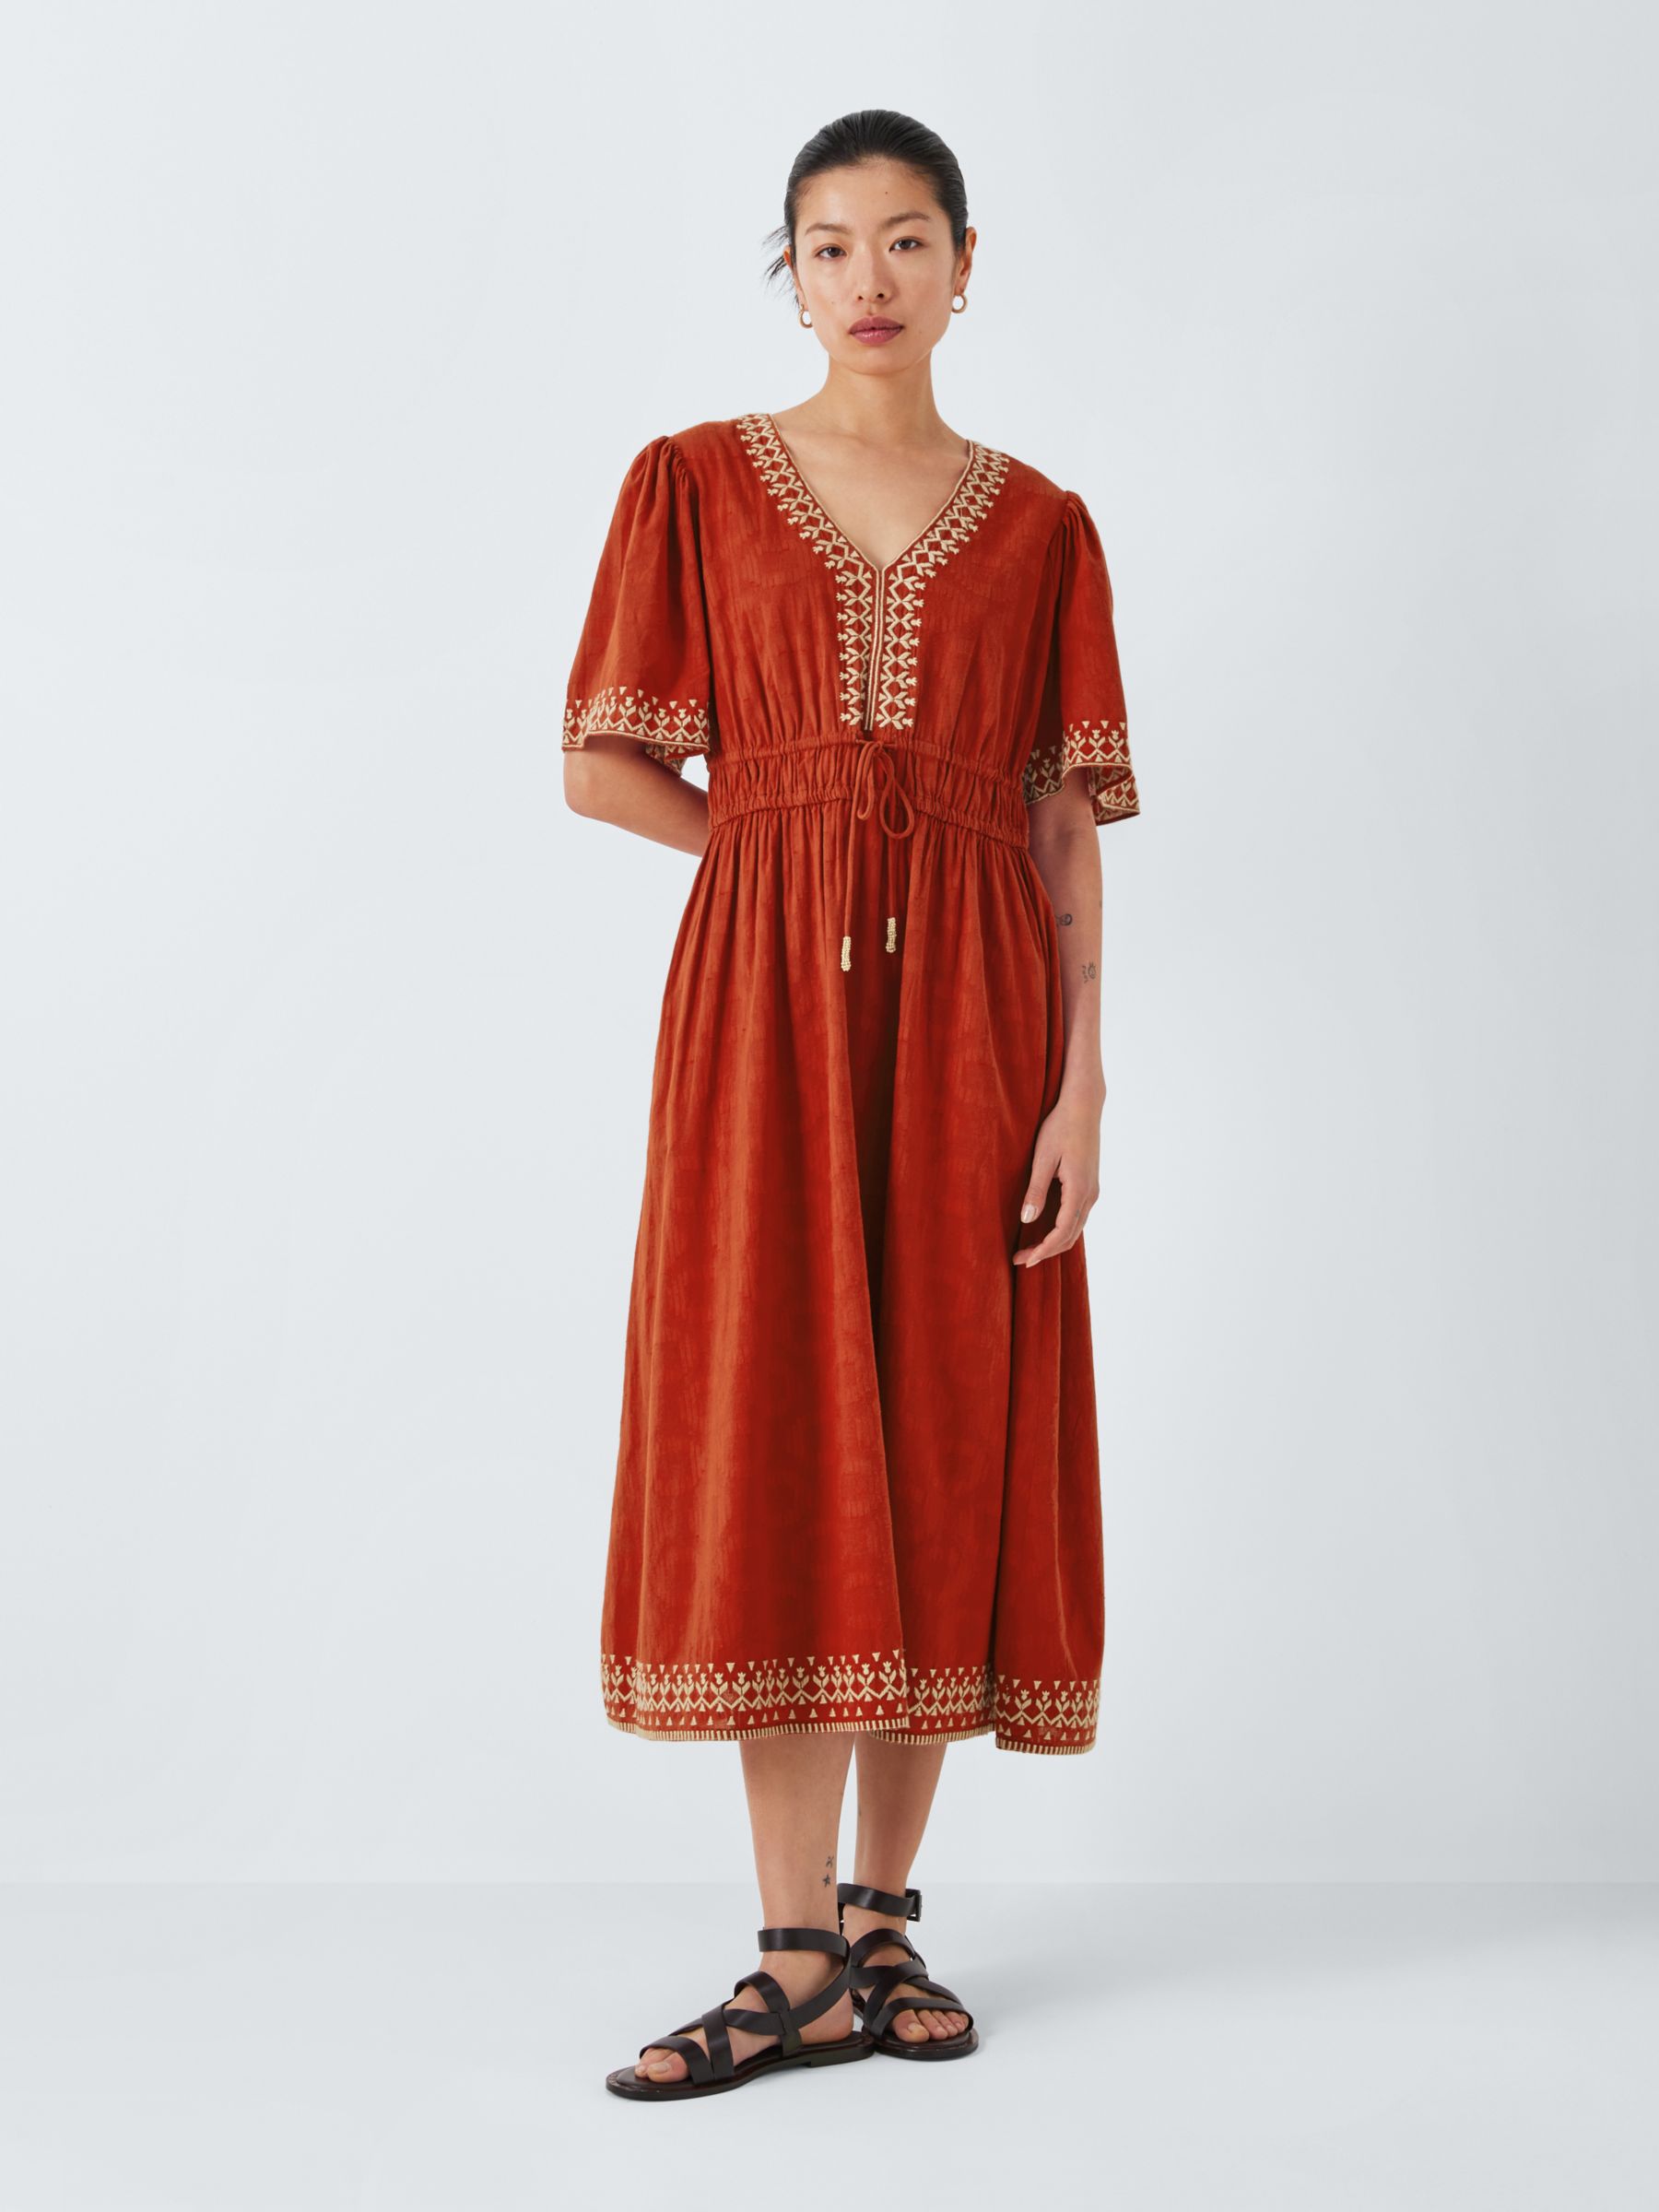 AND/OR Gianna Embroidered Dress, Rust, 6